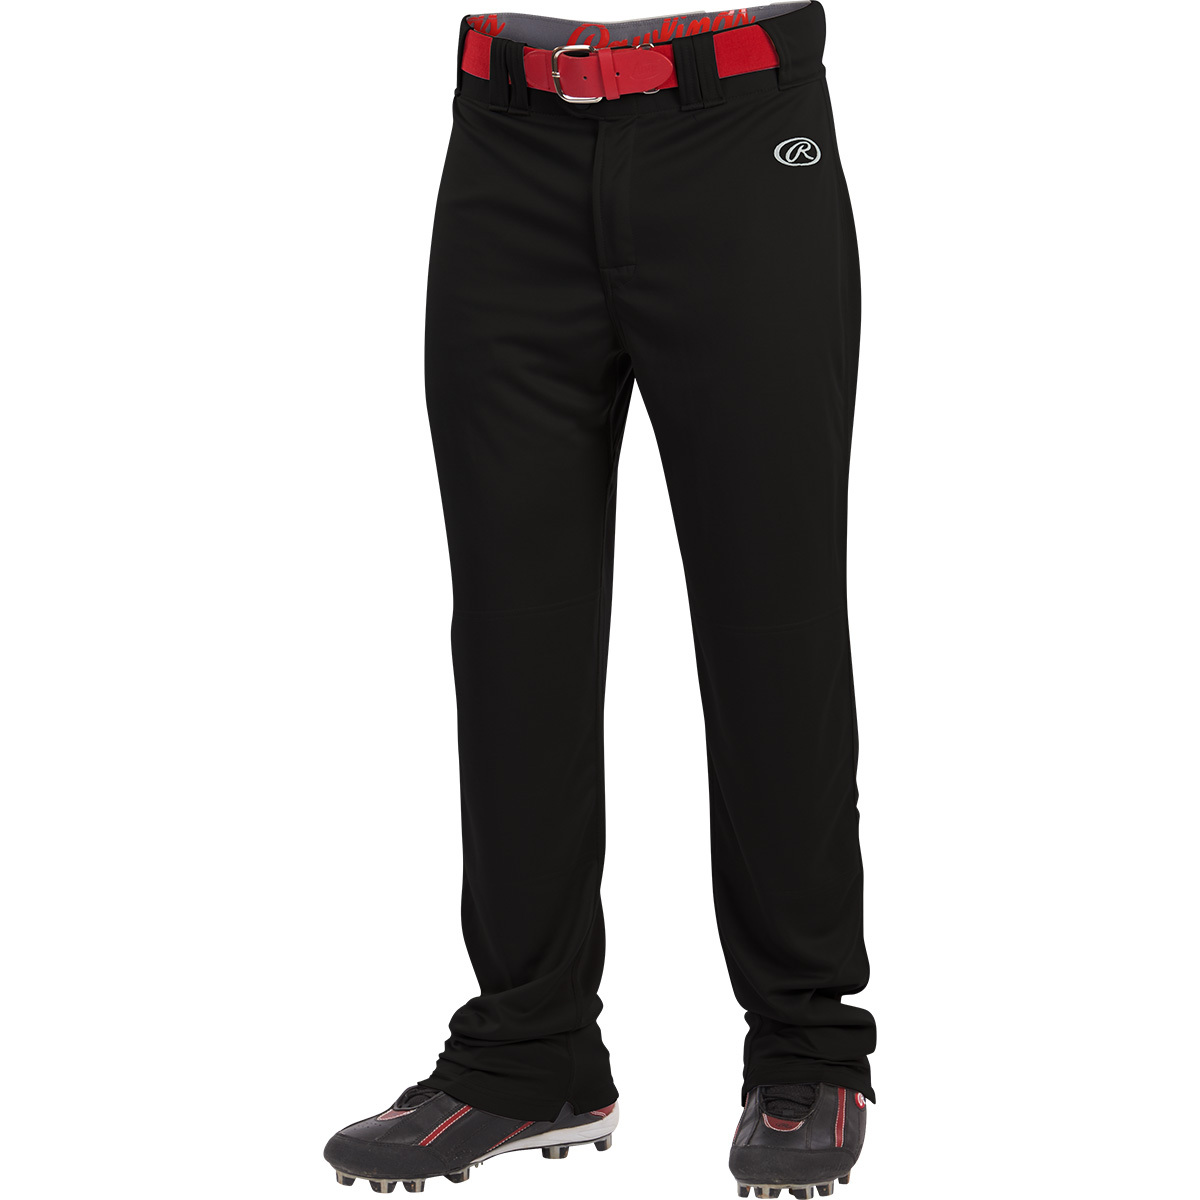 Adult Solid Color Rawlings Launch Series Game/Practice Baseball Pant Full Length 